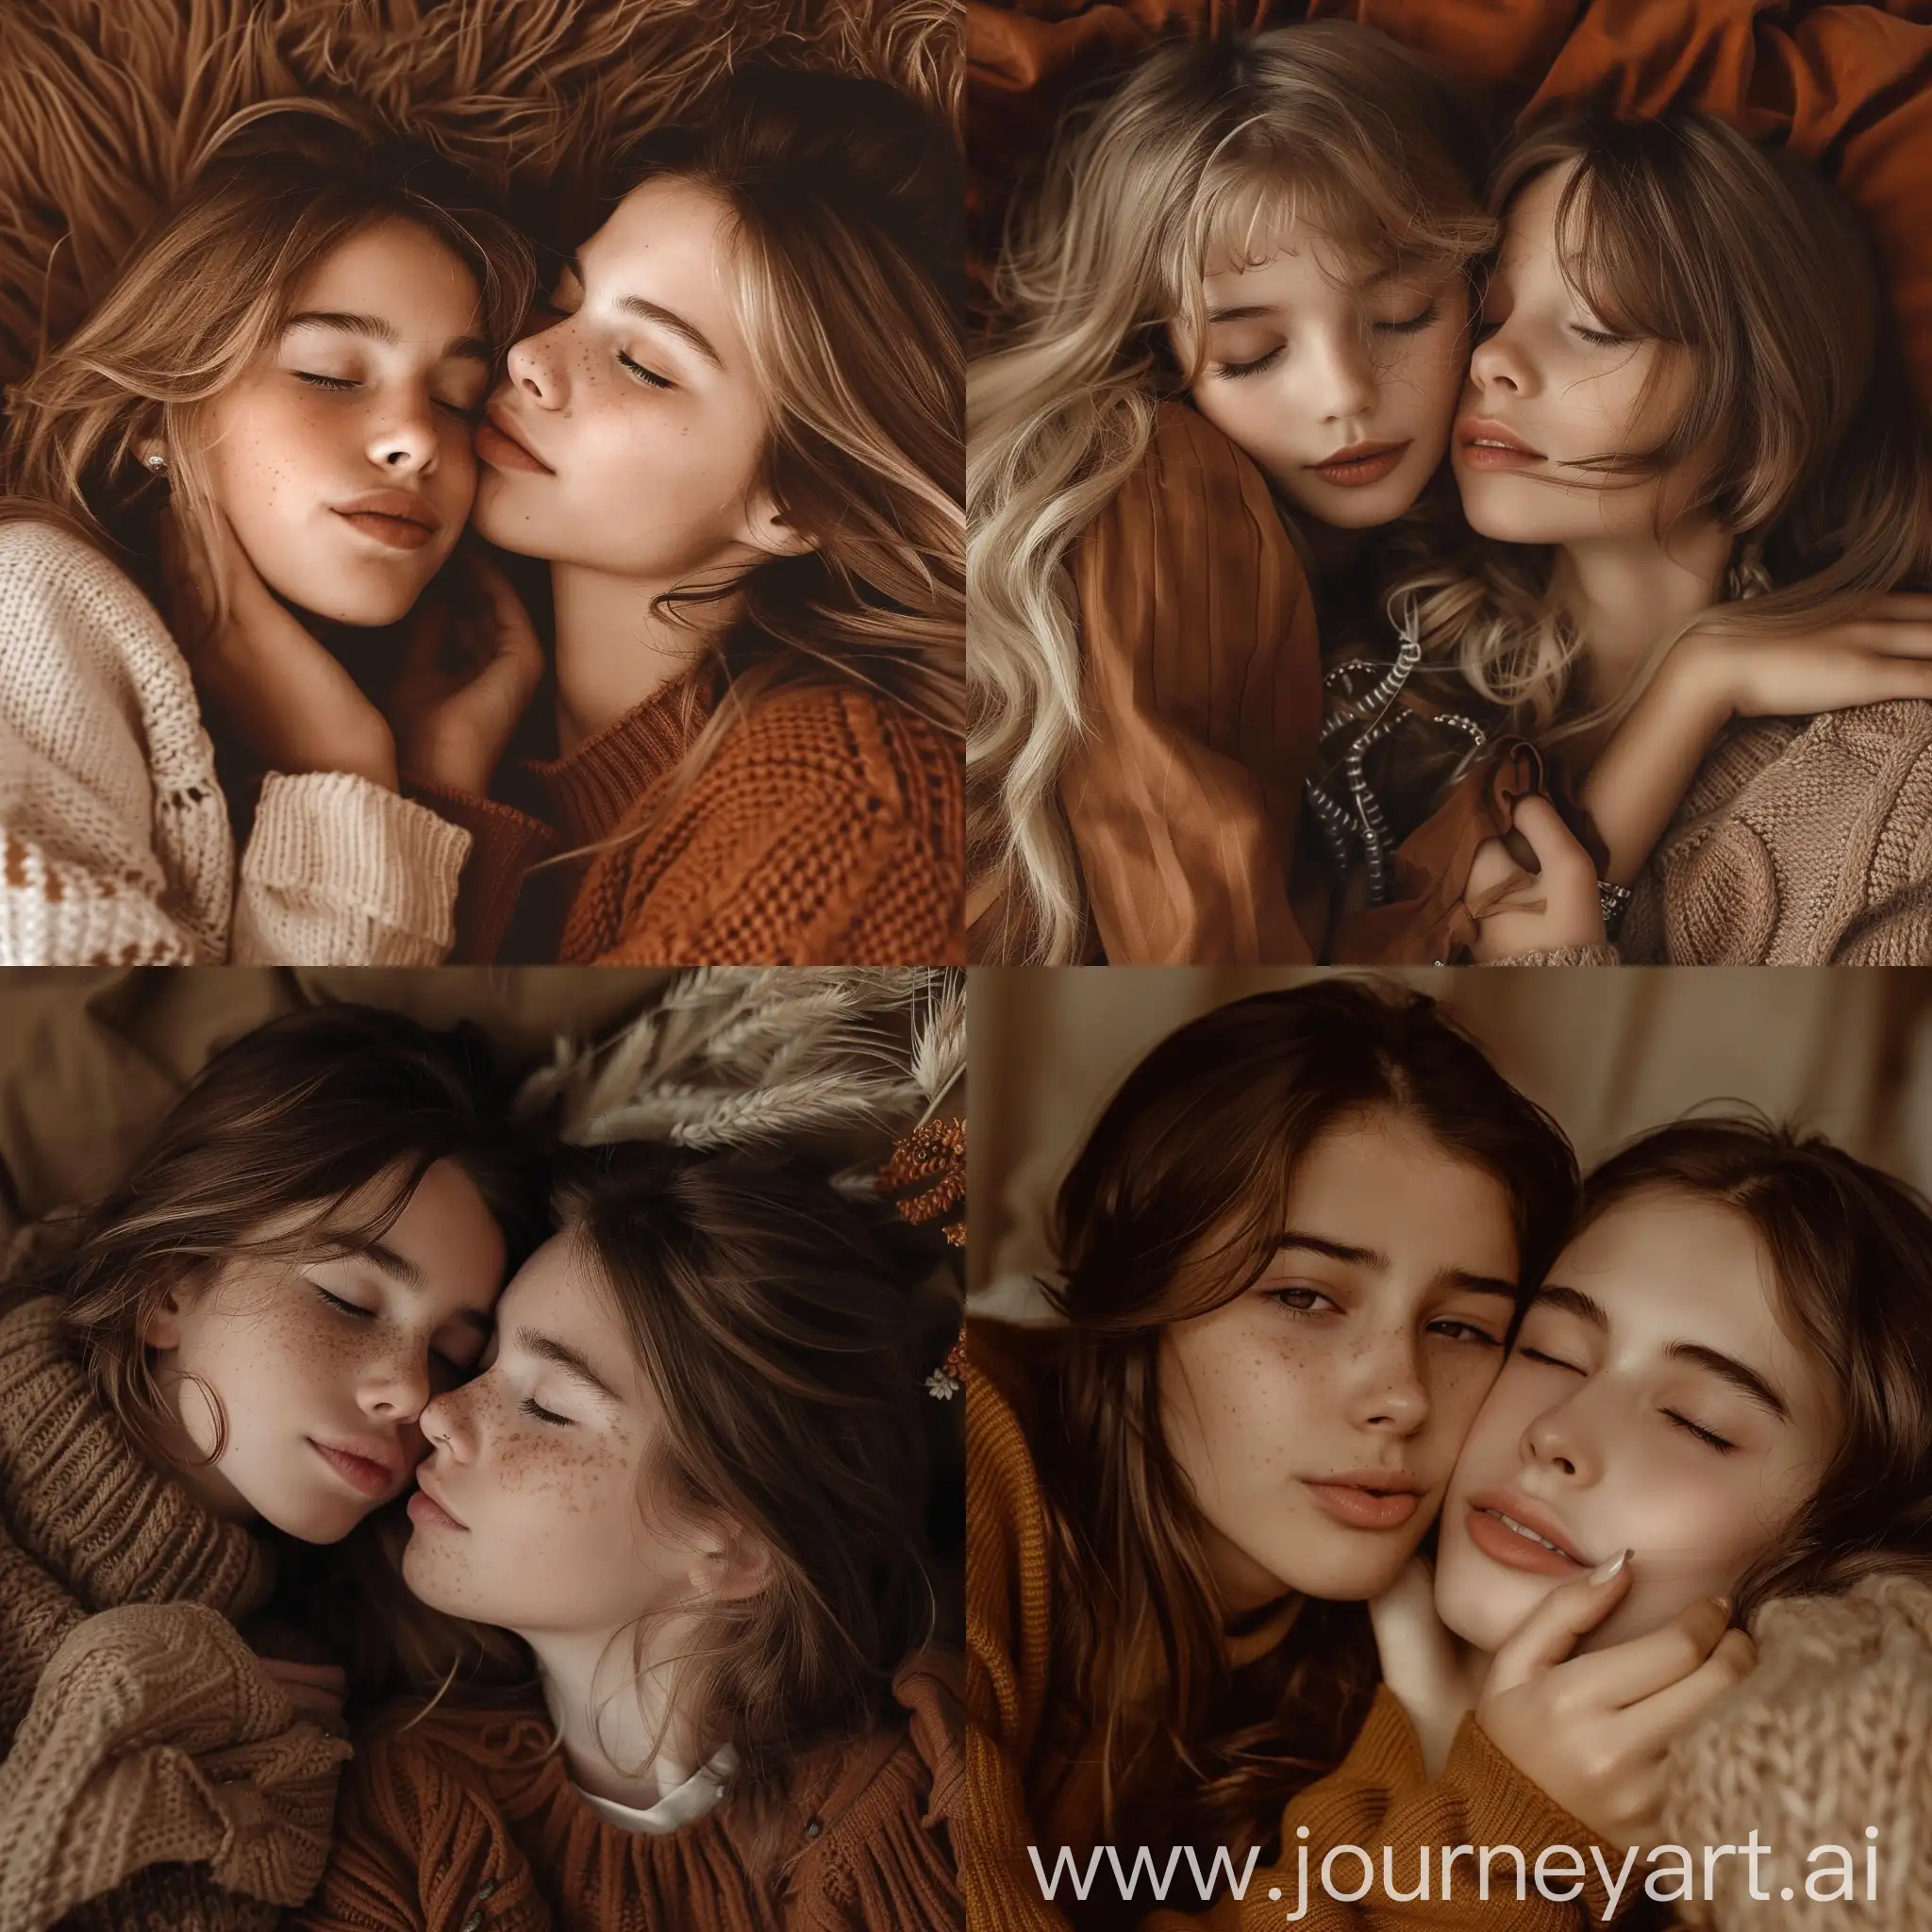 Aesthetic Instagram selfie of two teenage girls 16, lying down next to each other, romantic, cute, kissing cheek, warm brown color tones, cozy